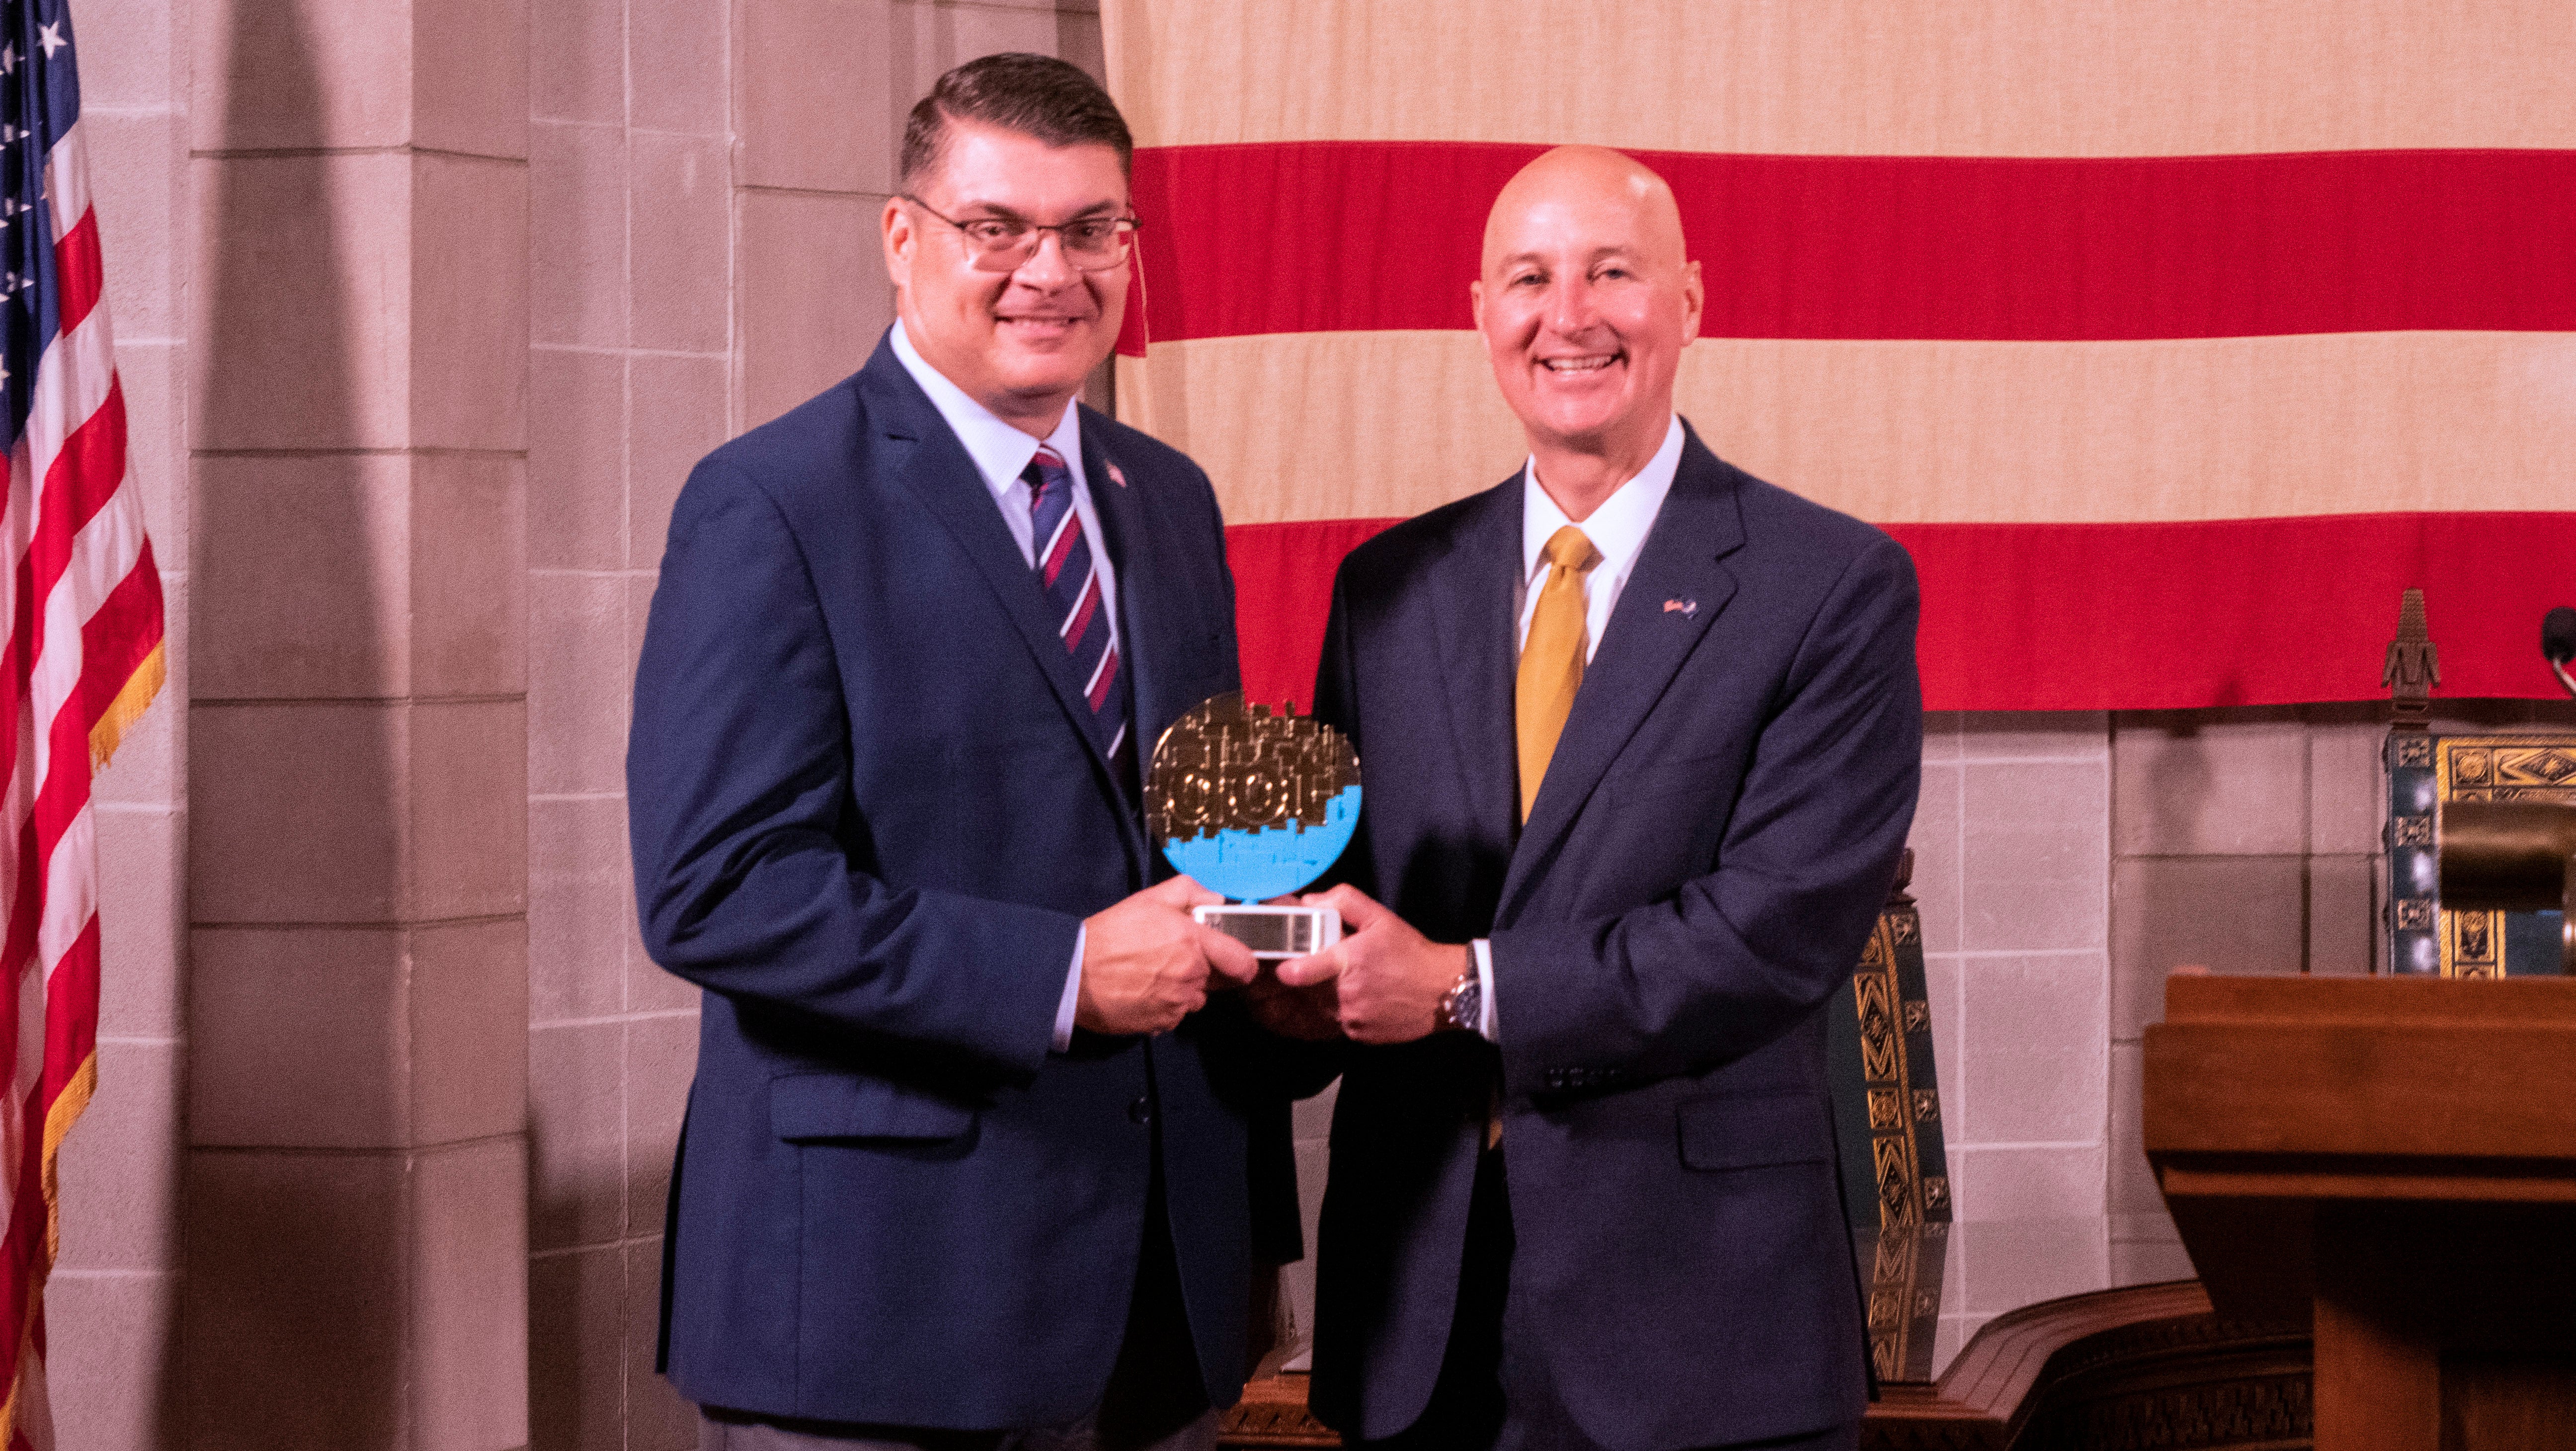 Governor Ricketts (right) and NDVA Director John Hilgert (left) with the dotCOMM Gold Award. 